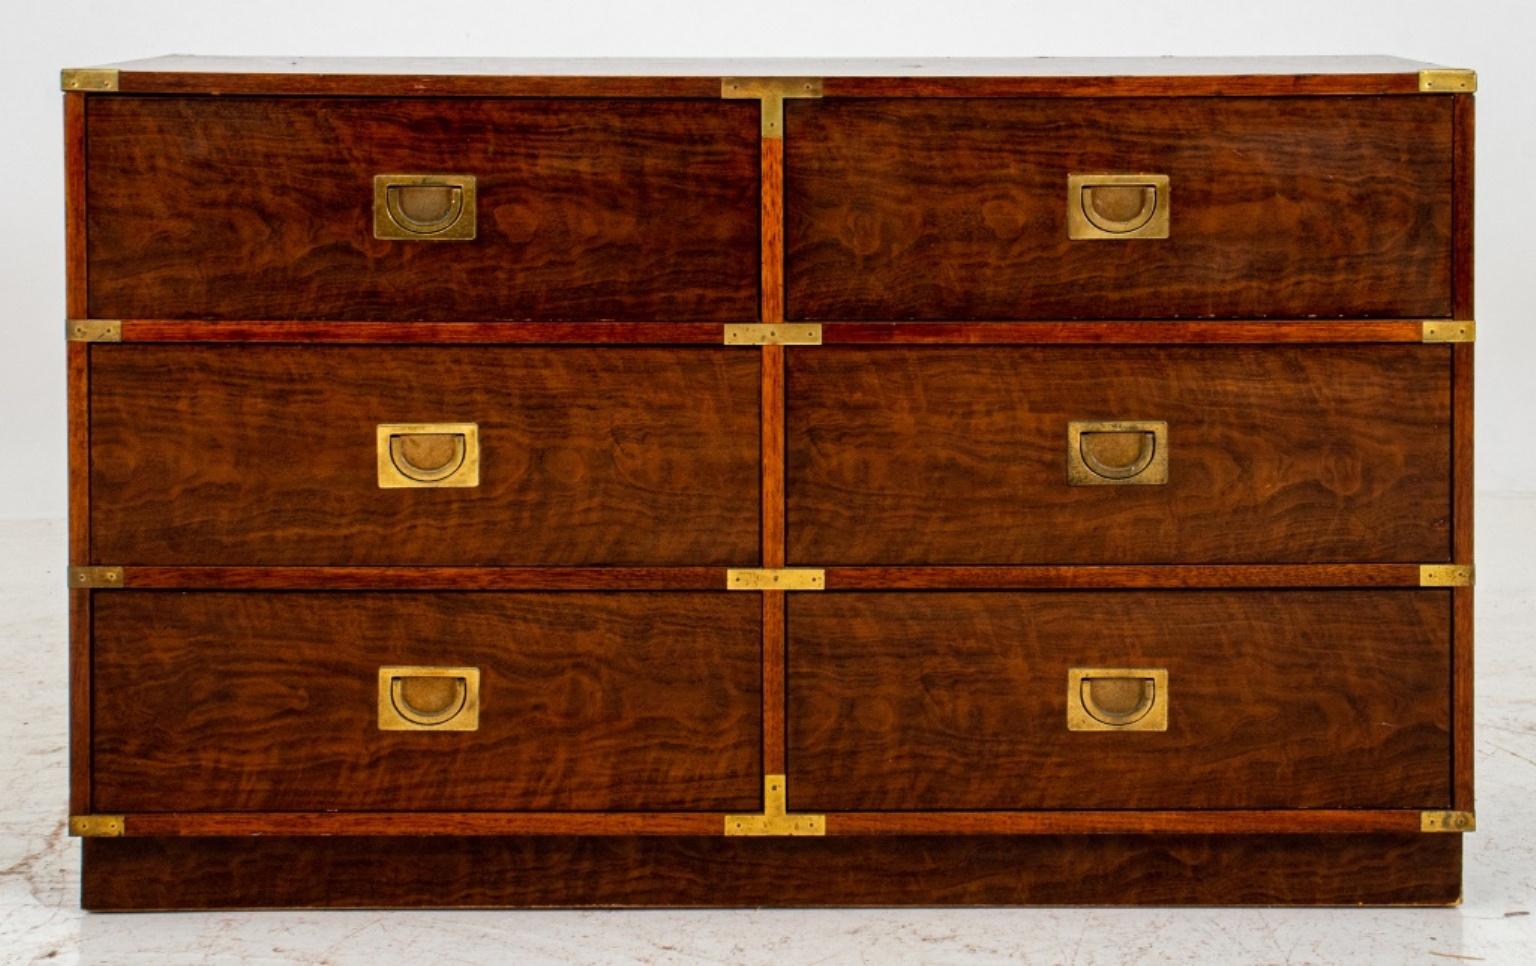 Drexel heritage campaign style brass mounted mahogany dresser, with brass bound corners and fittings, rectangular with two sets of three short drawers. Measures: 29